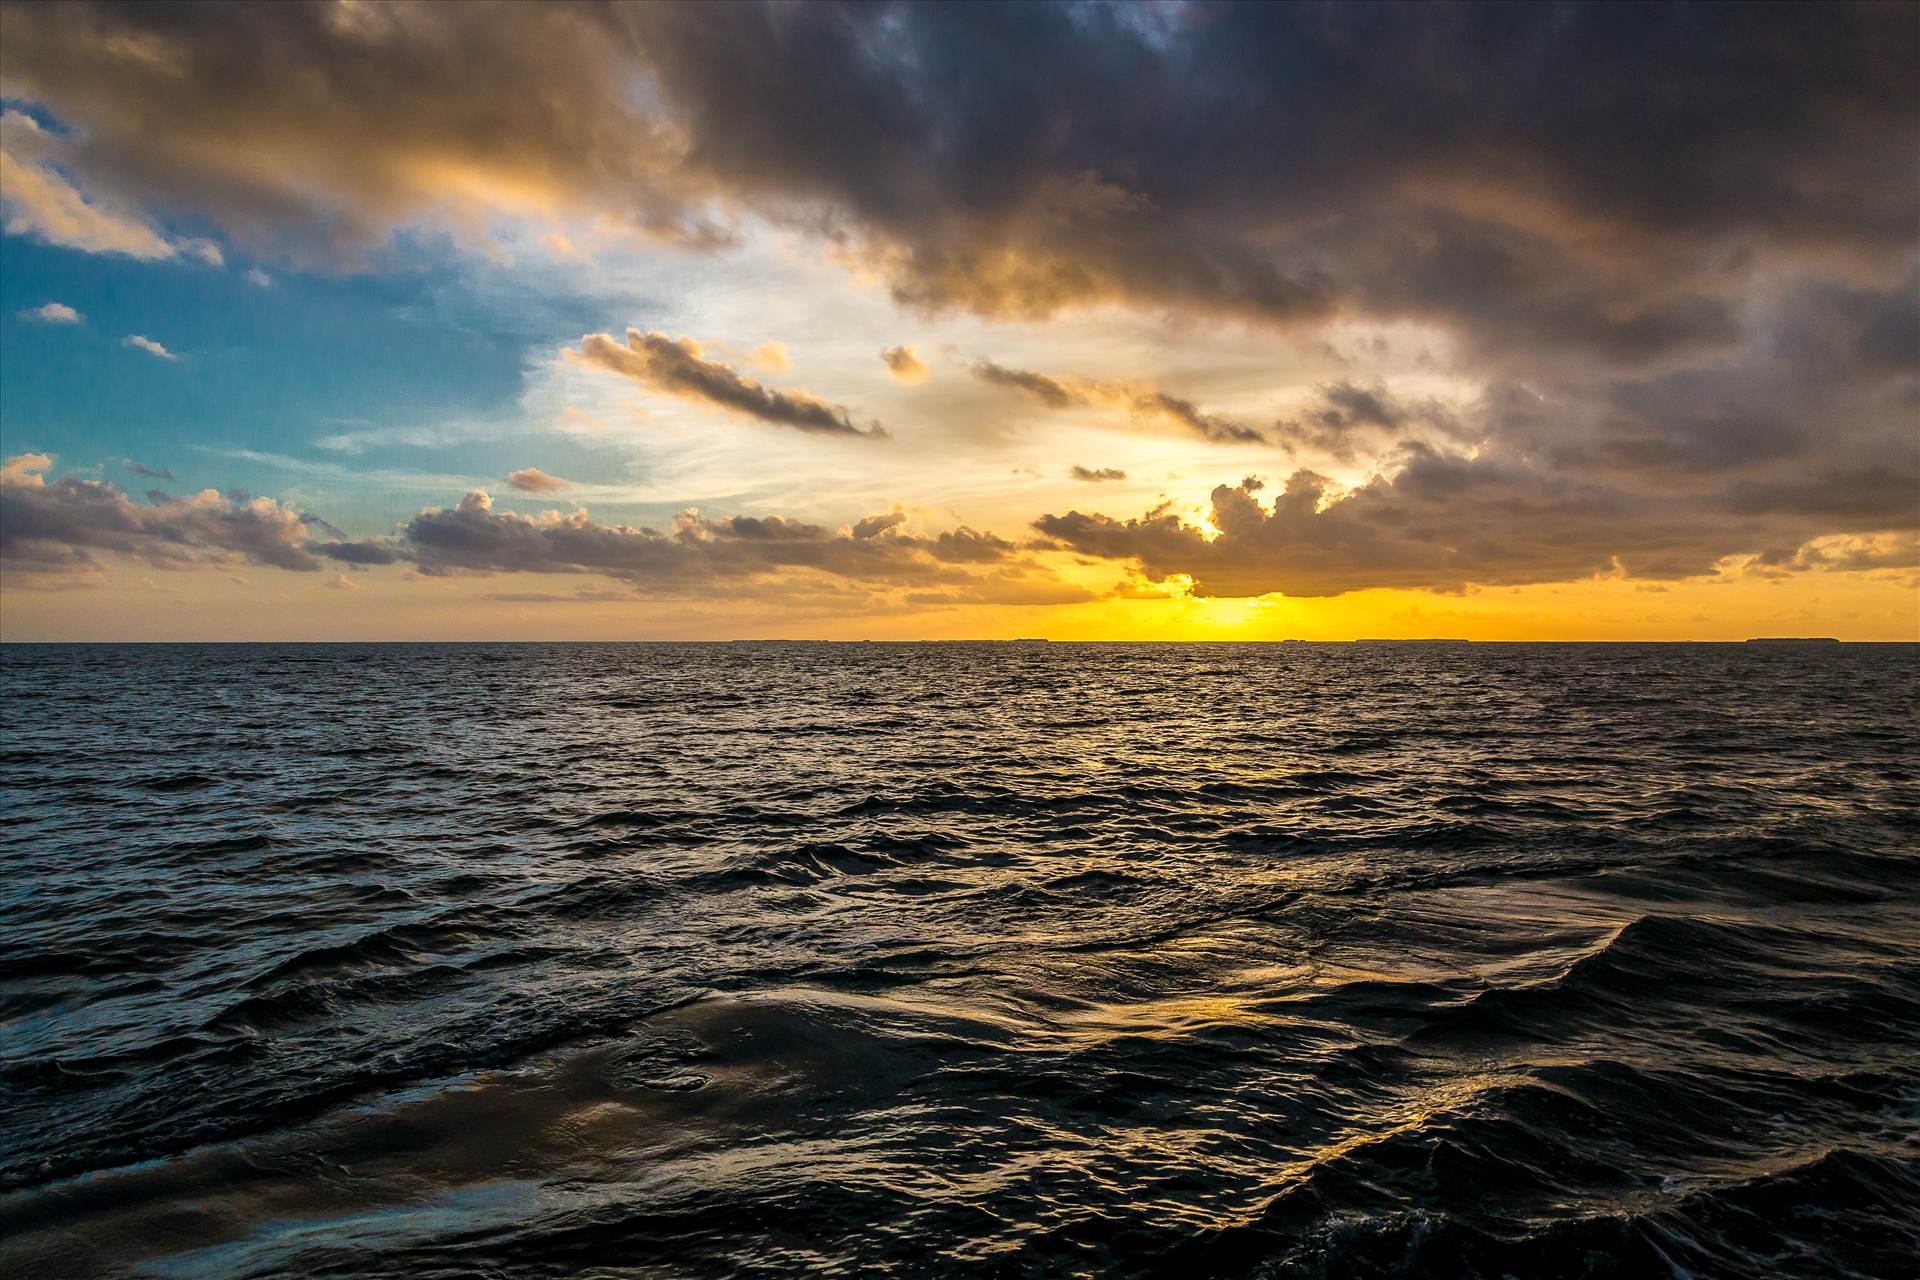 Sunset Cruise - The sun sets outside of Key West, as seen from a catamaran cruise. by Scott Smith Photos